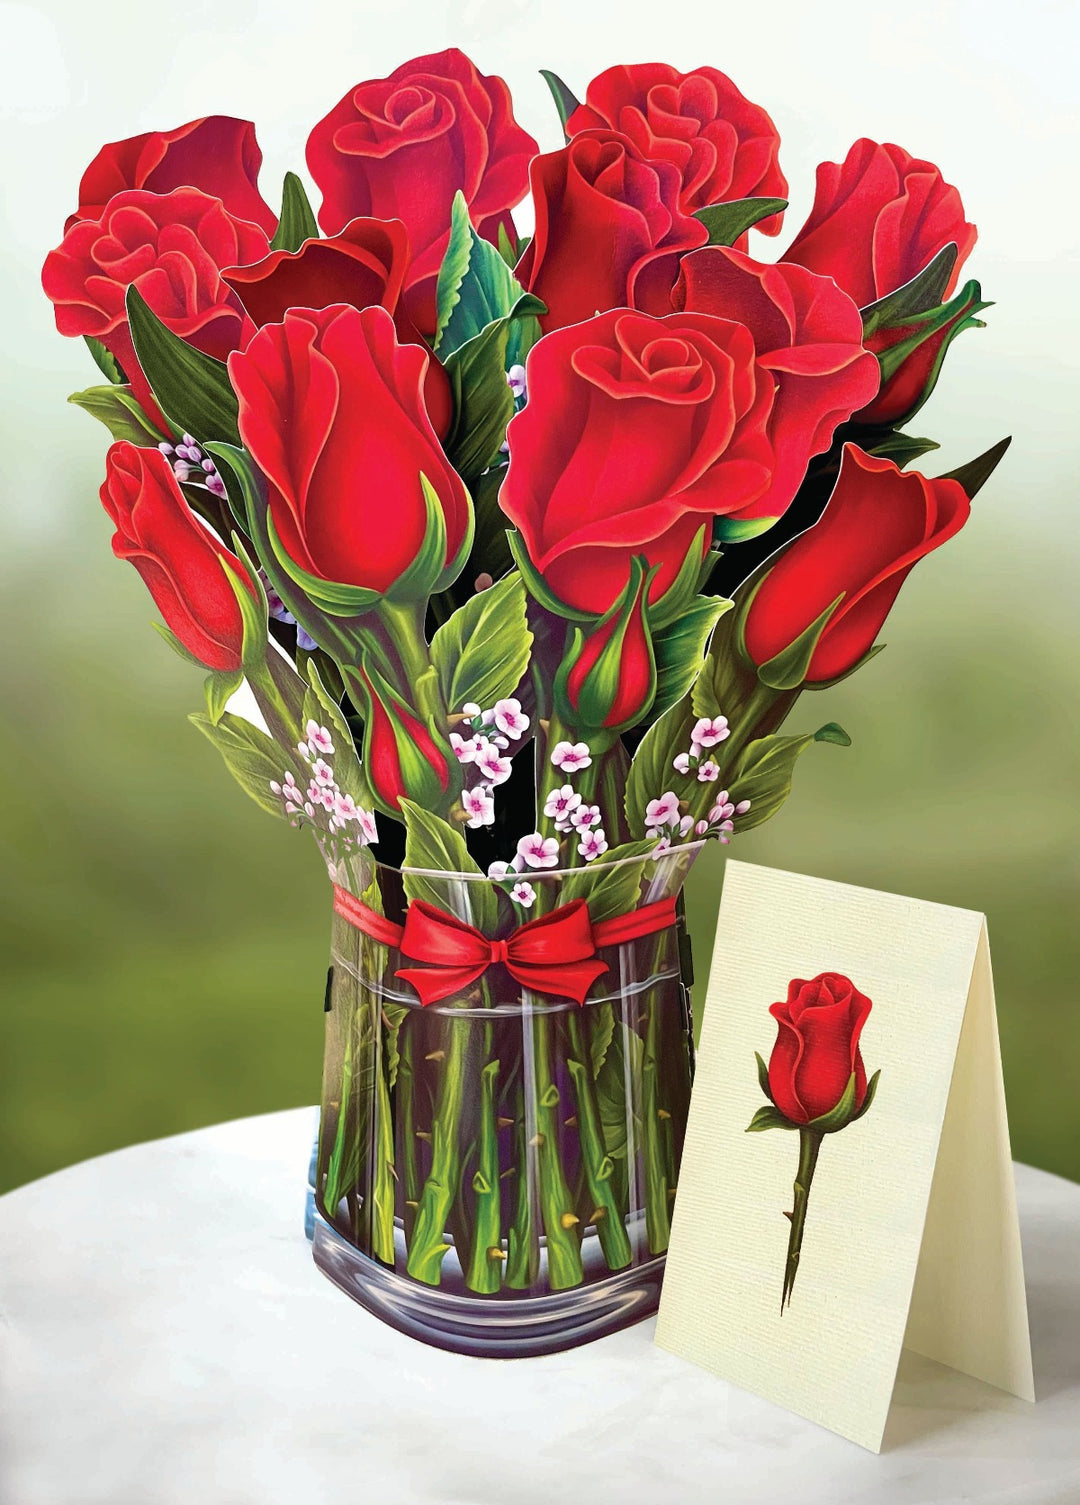 FreshCut Paper's 3D pop up Red Roses  include a matching 2.75" x 8" note card so you may write your own personal message to your gift recipient.